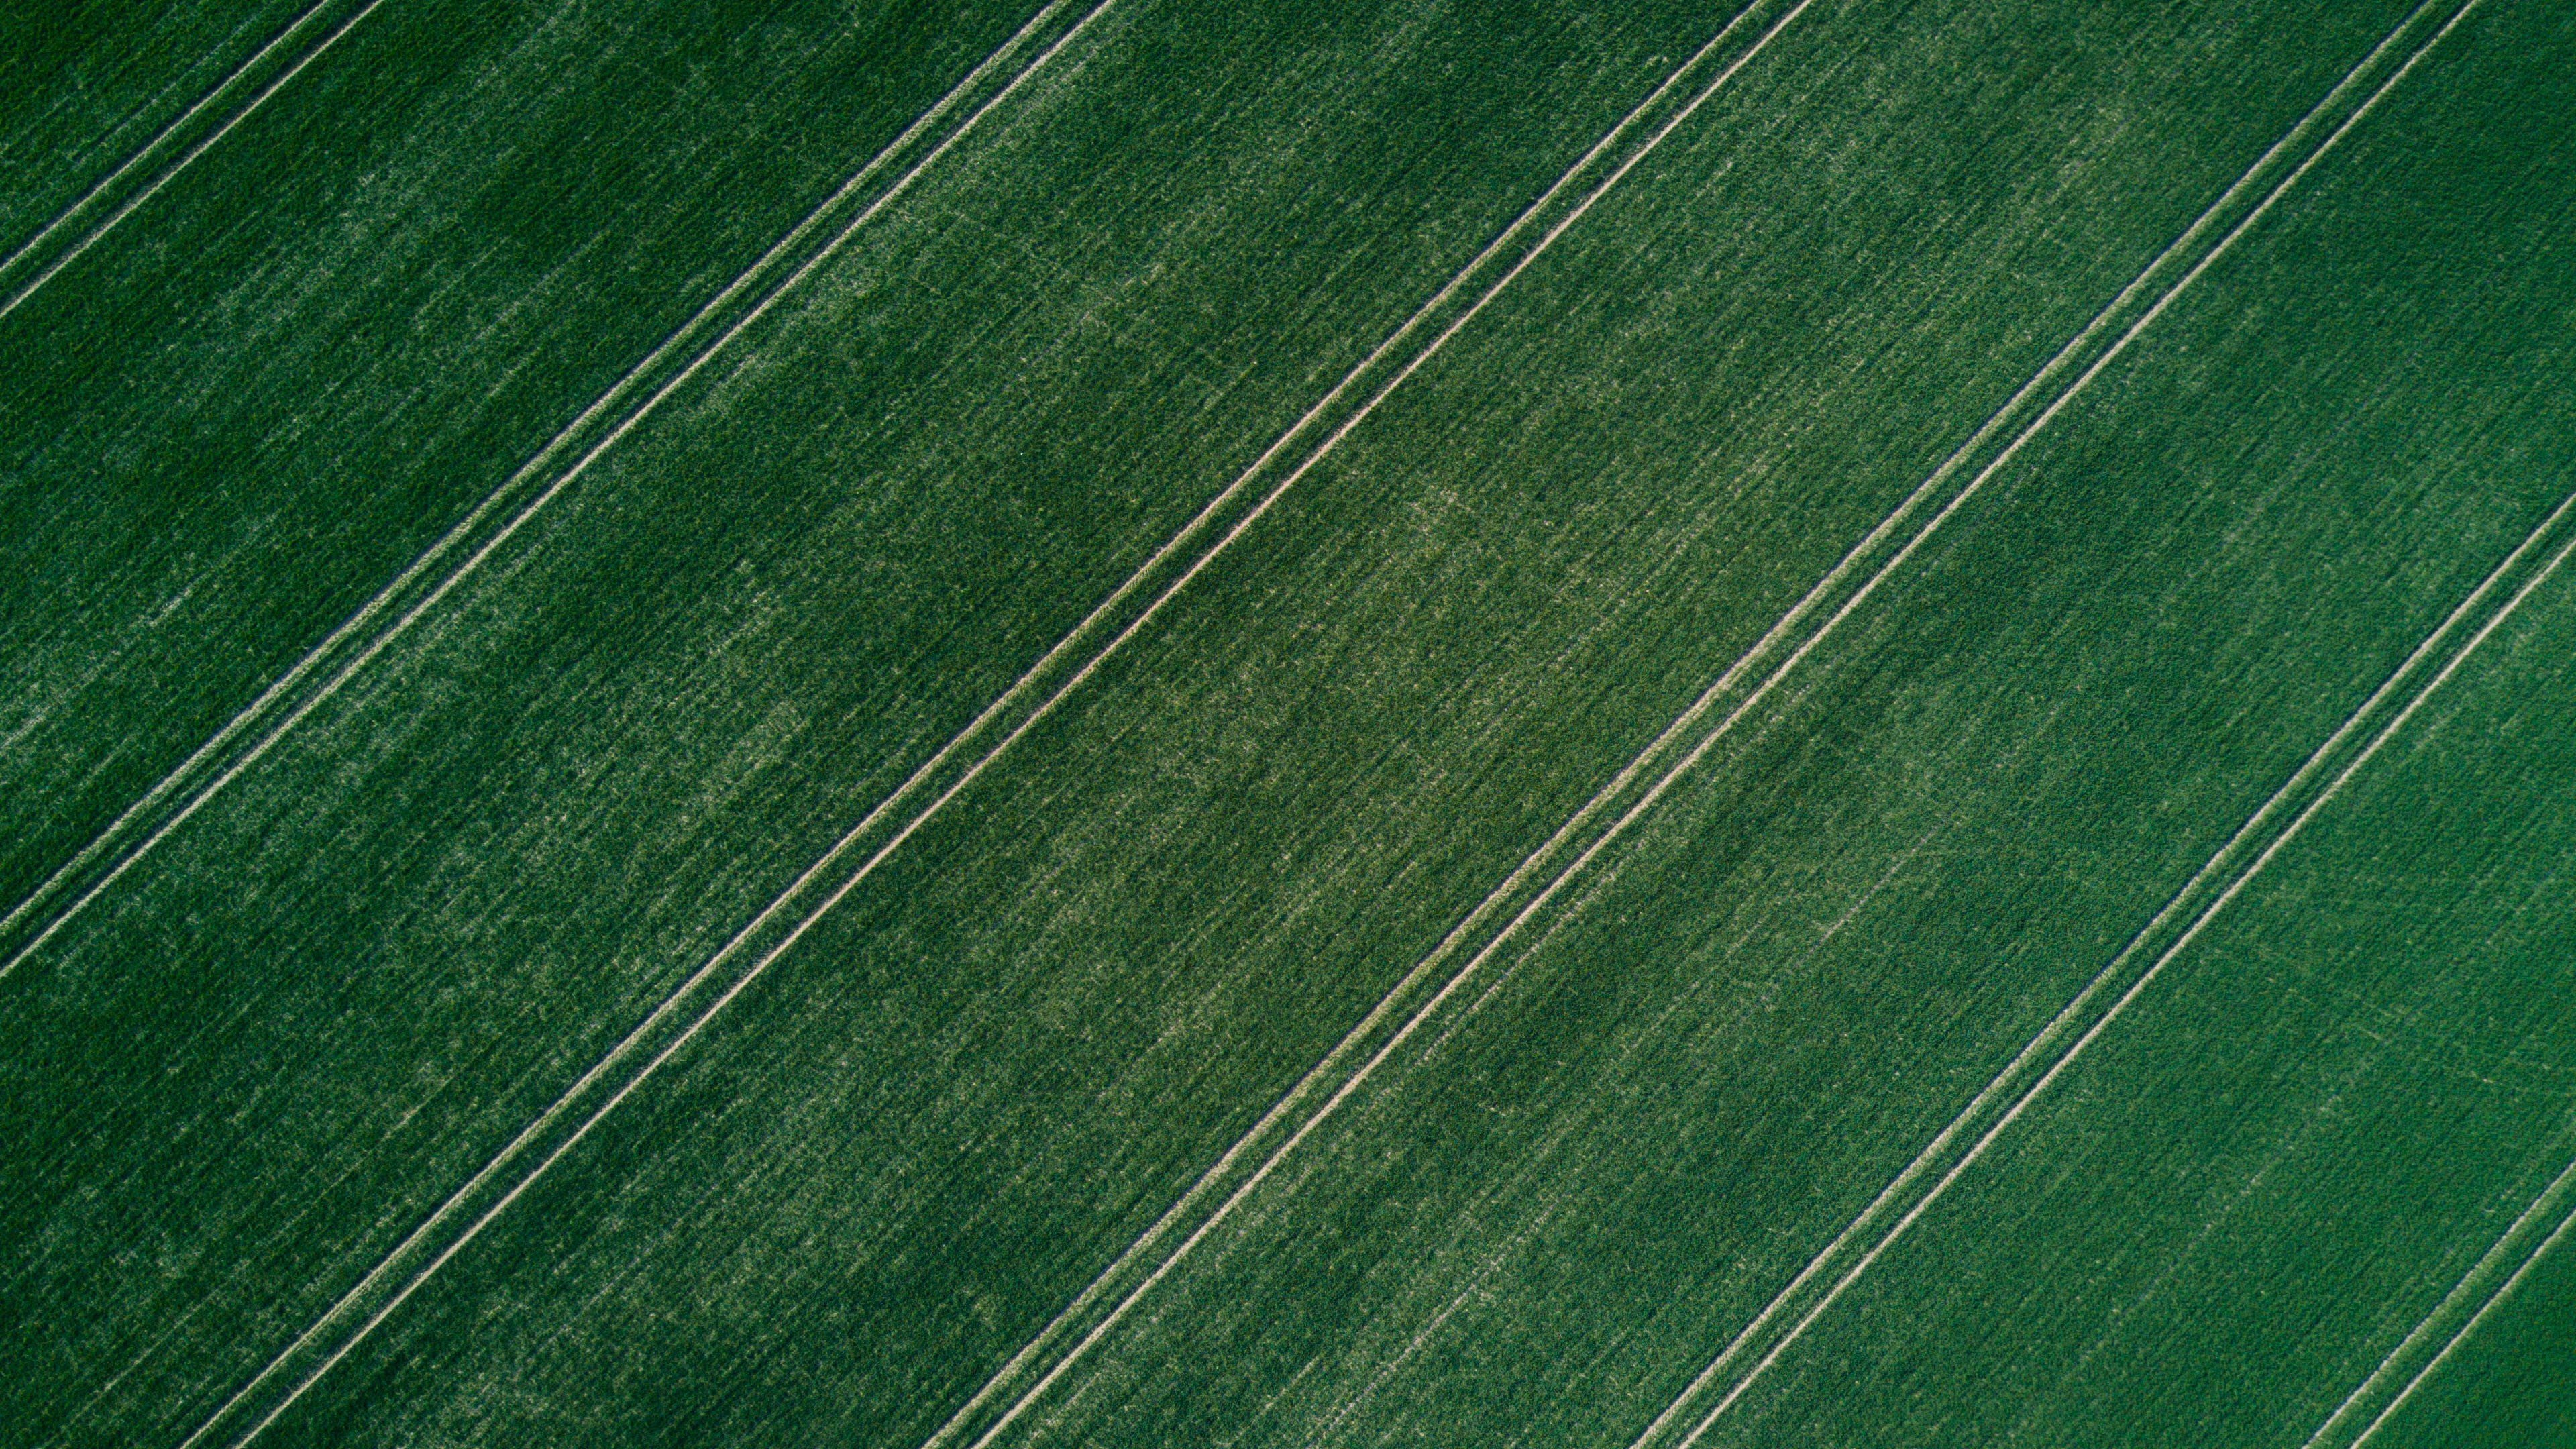 photography, Grass, Field, Aerial view, Landscape, Symmetry Wallpaper